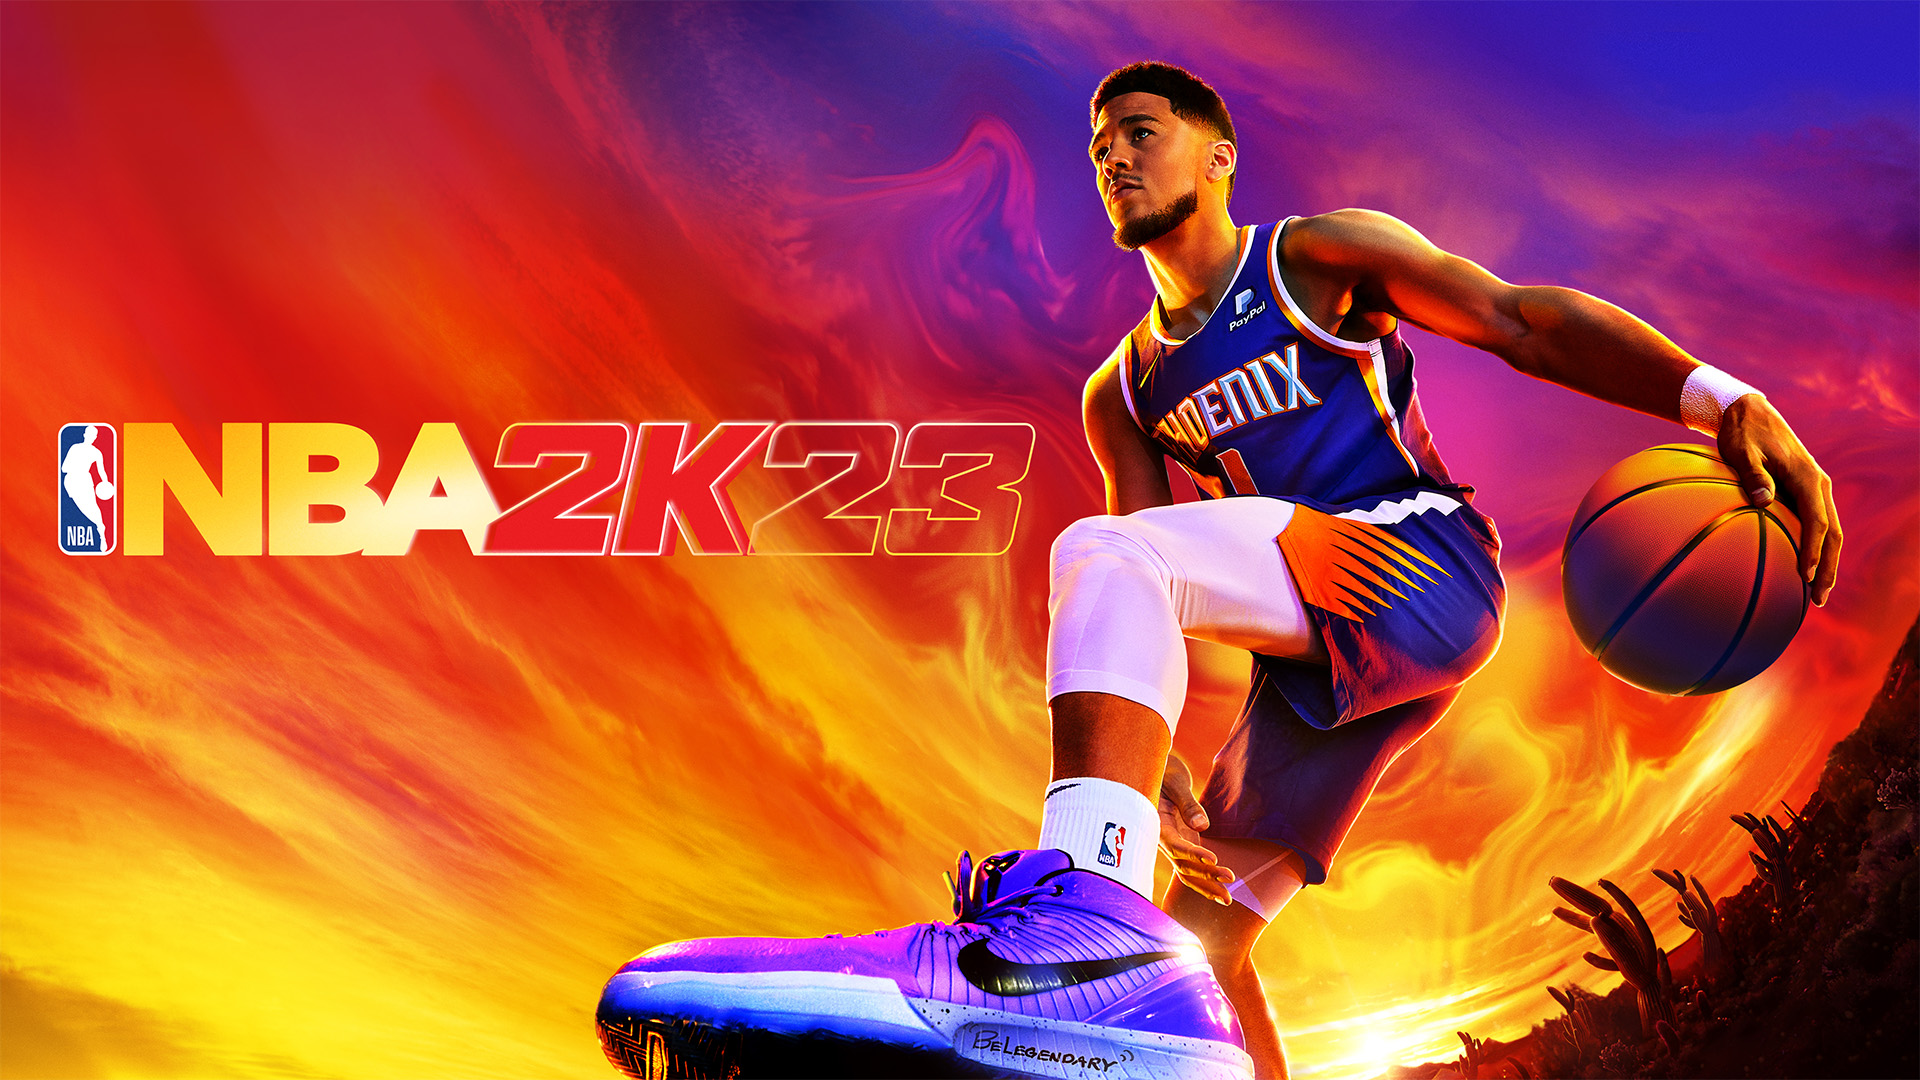 Devin Brooker also unveiled as NBA 2K23 Cover Athlete